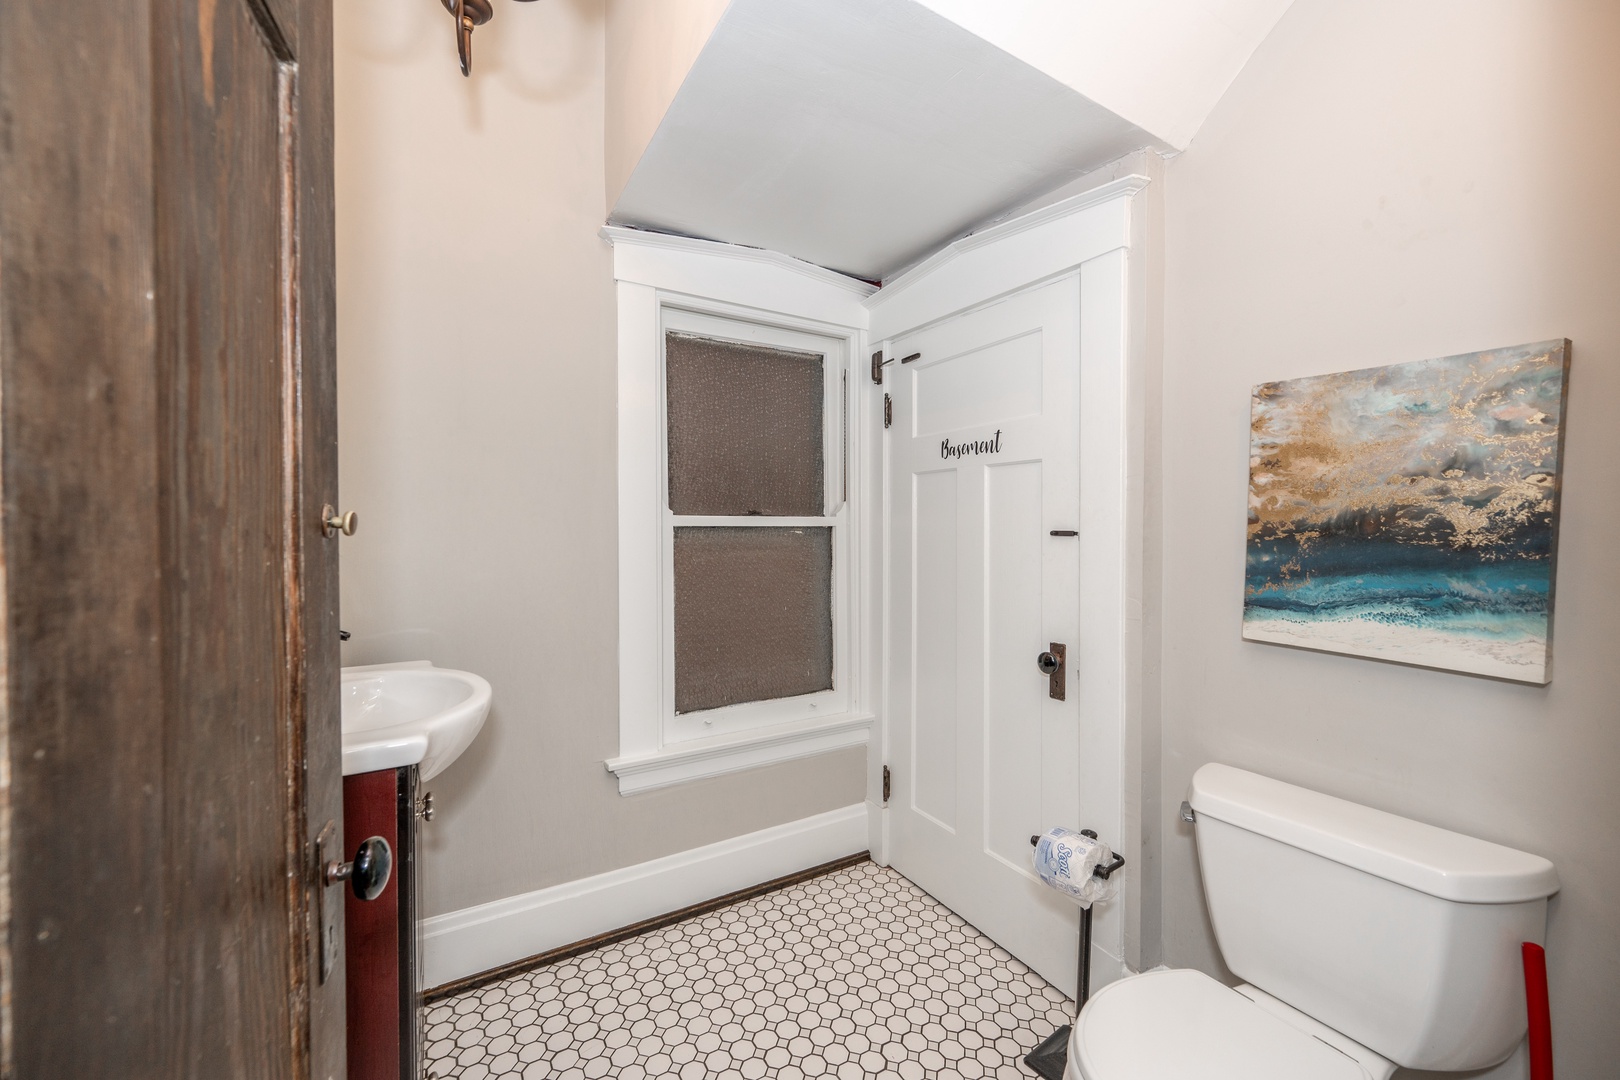 A convenient powder room is available on the first floor